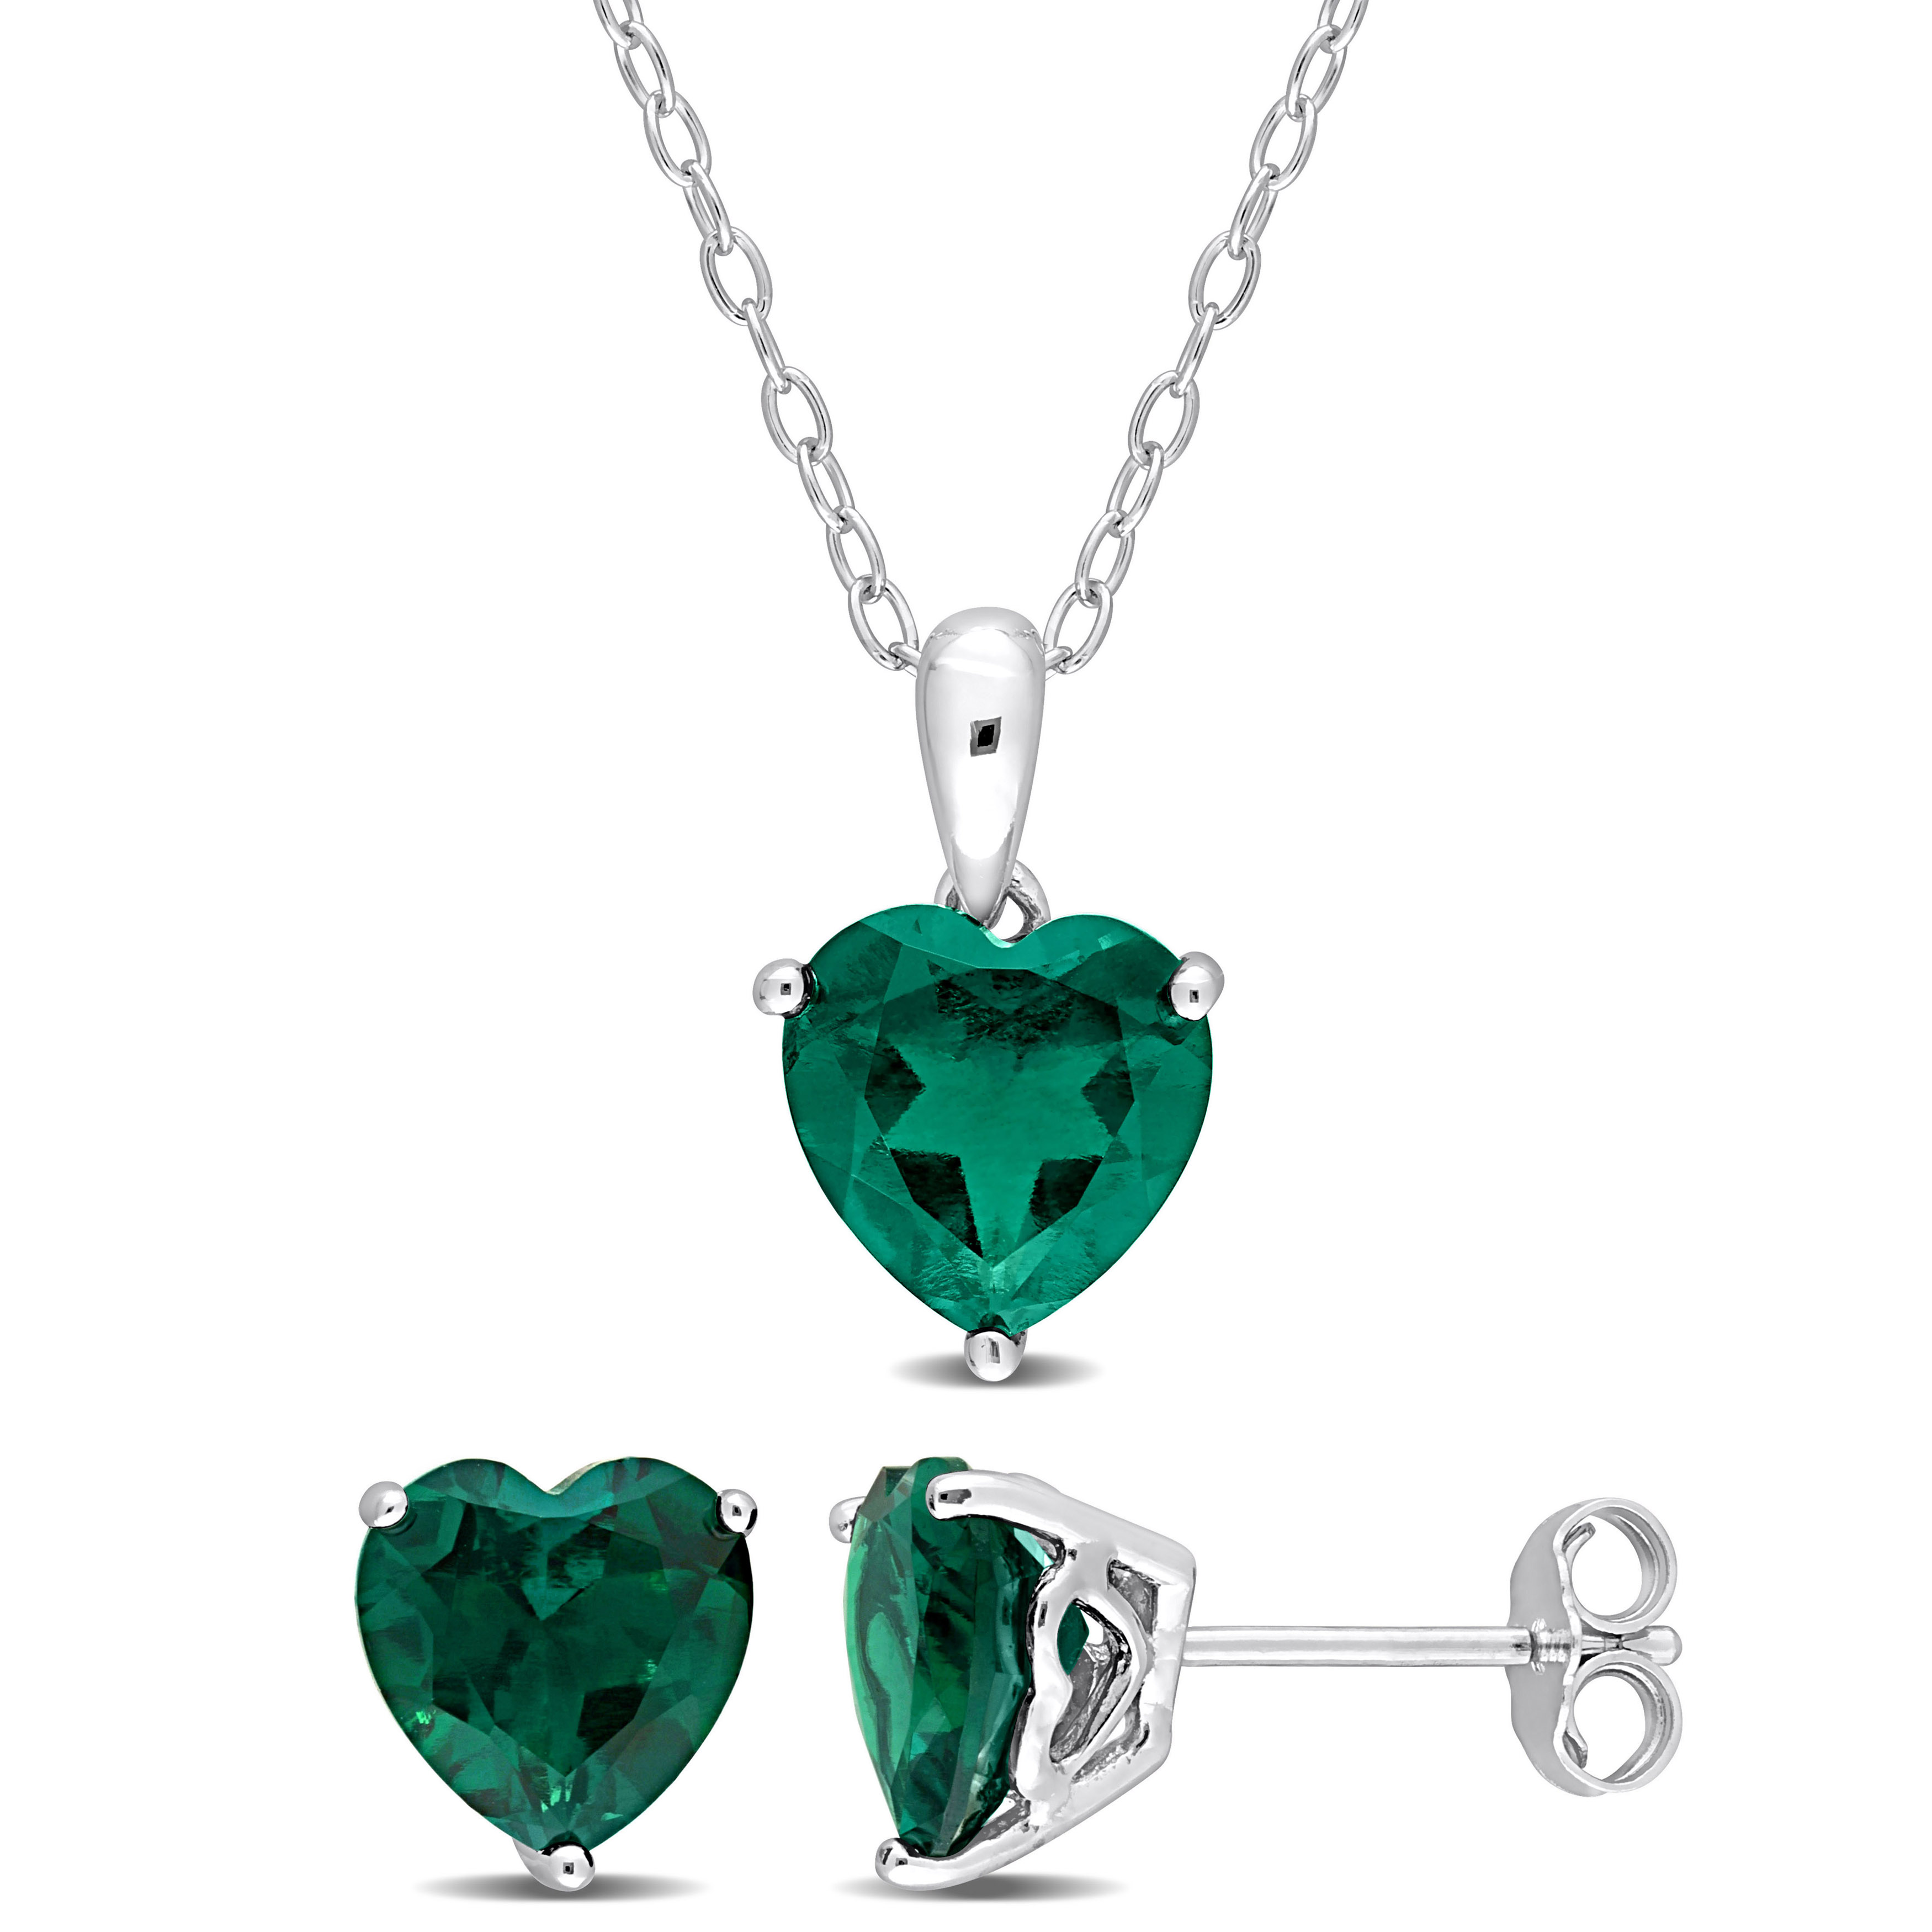 4 1/2 CT TGW Heart-Shape Created Emerald 2-Piece Set of Pendant with Chain and Earrings in Sterling Silver